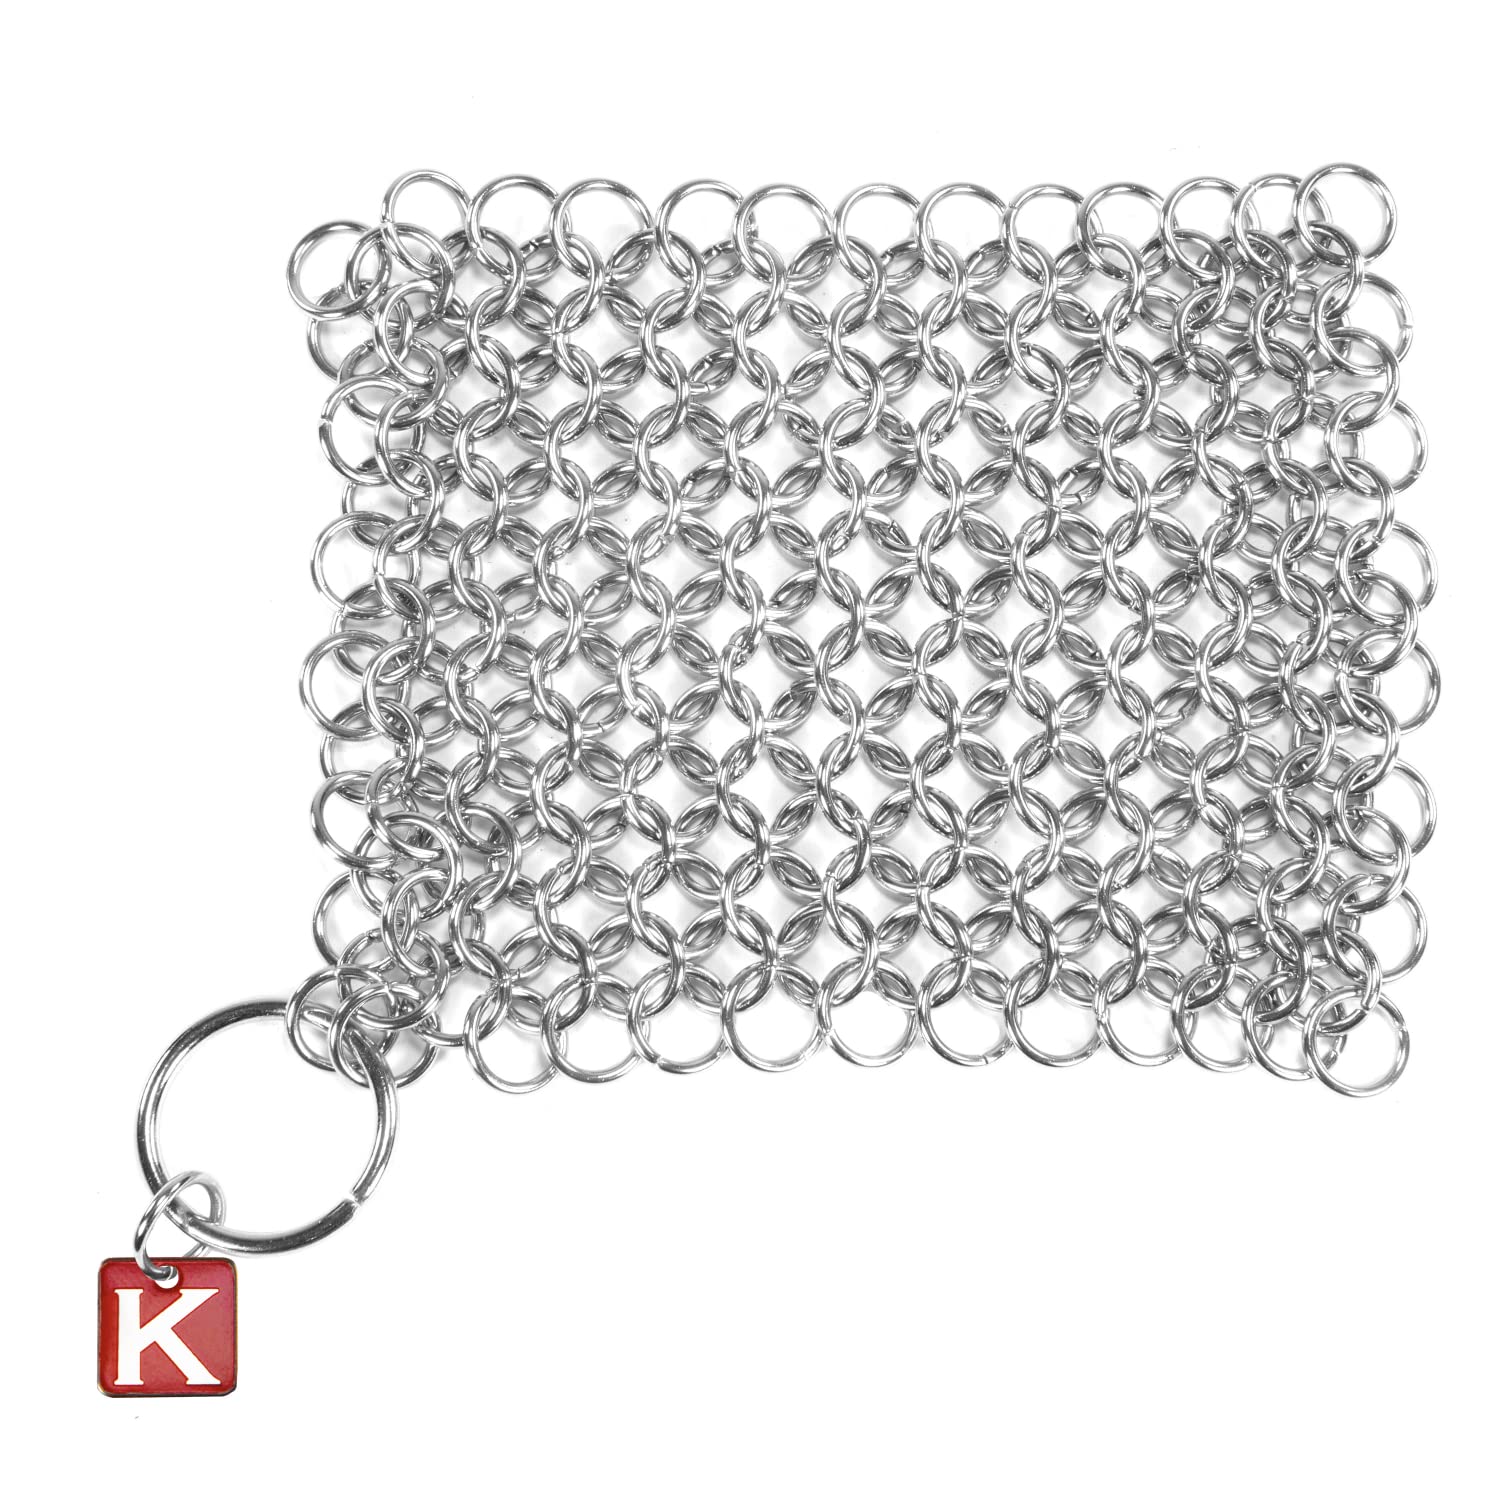 Knapp Made Original cm Scrubber 4 inch Chainmail Scrubber - Cast Iron Cleaner - for Cast Iron, Stainless Steel, Hard Anodized Cookware and Other Pots